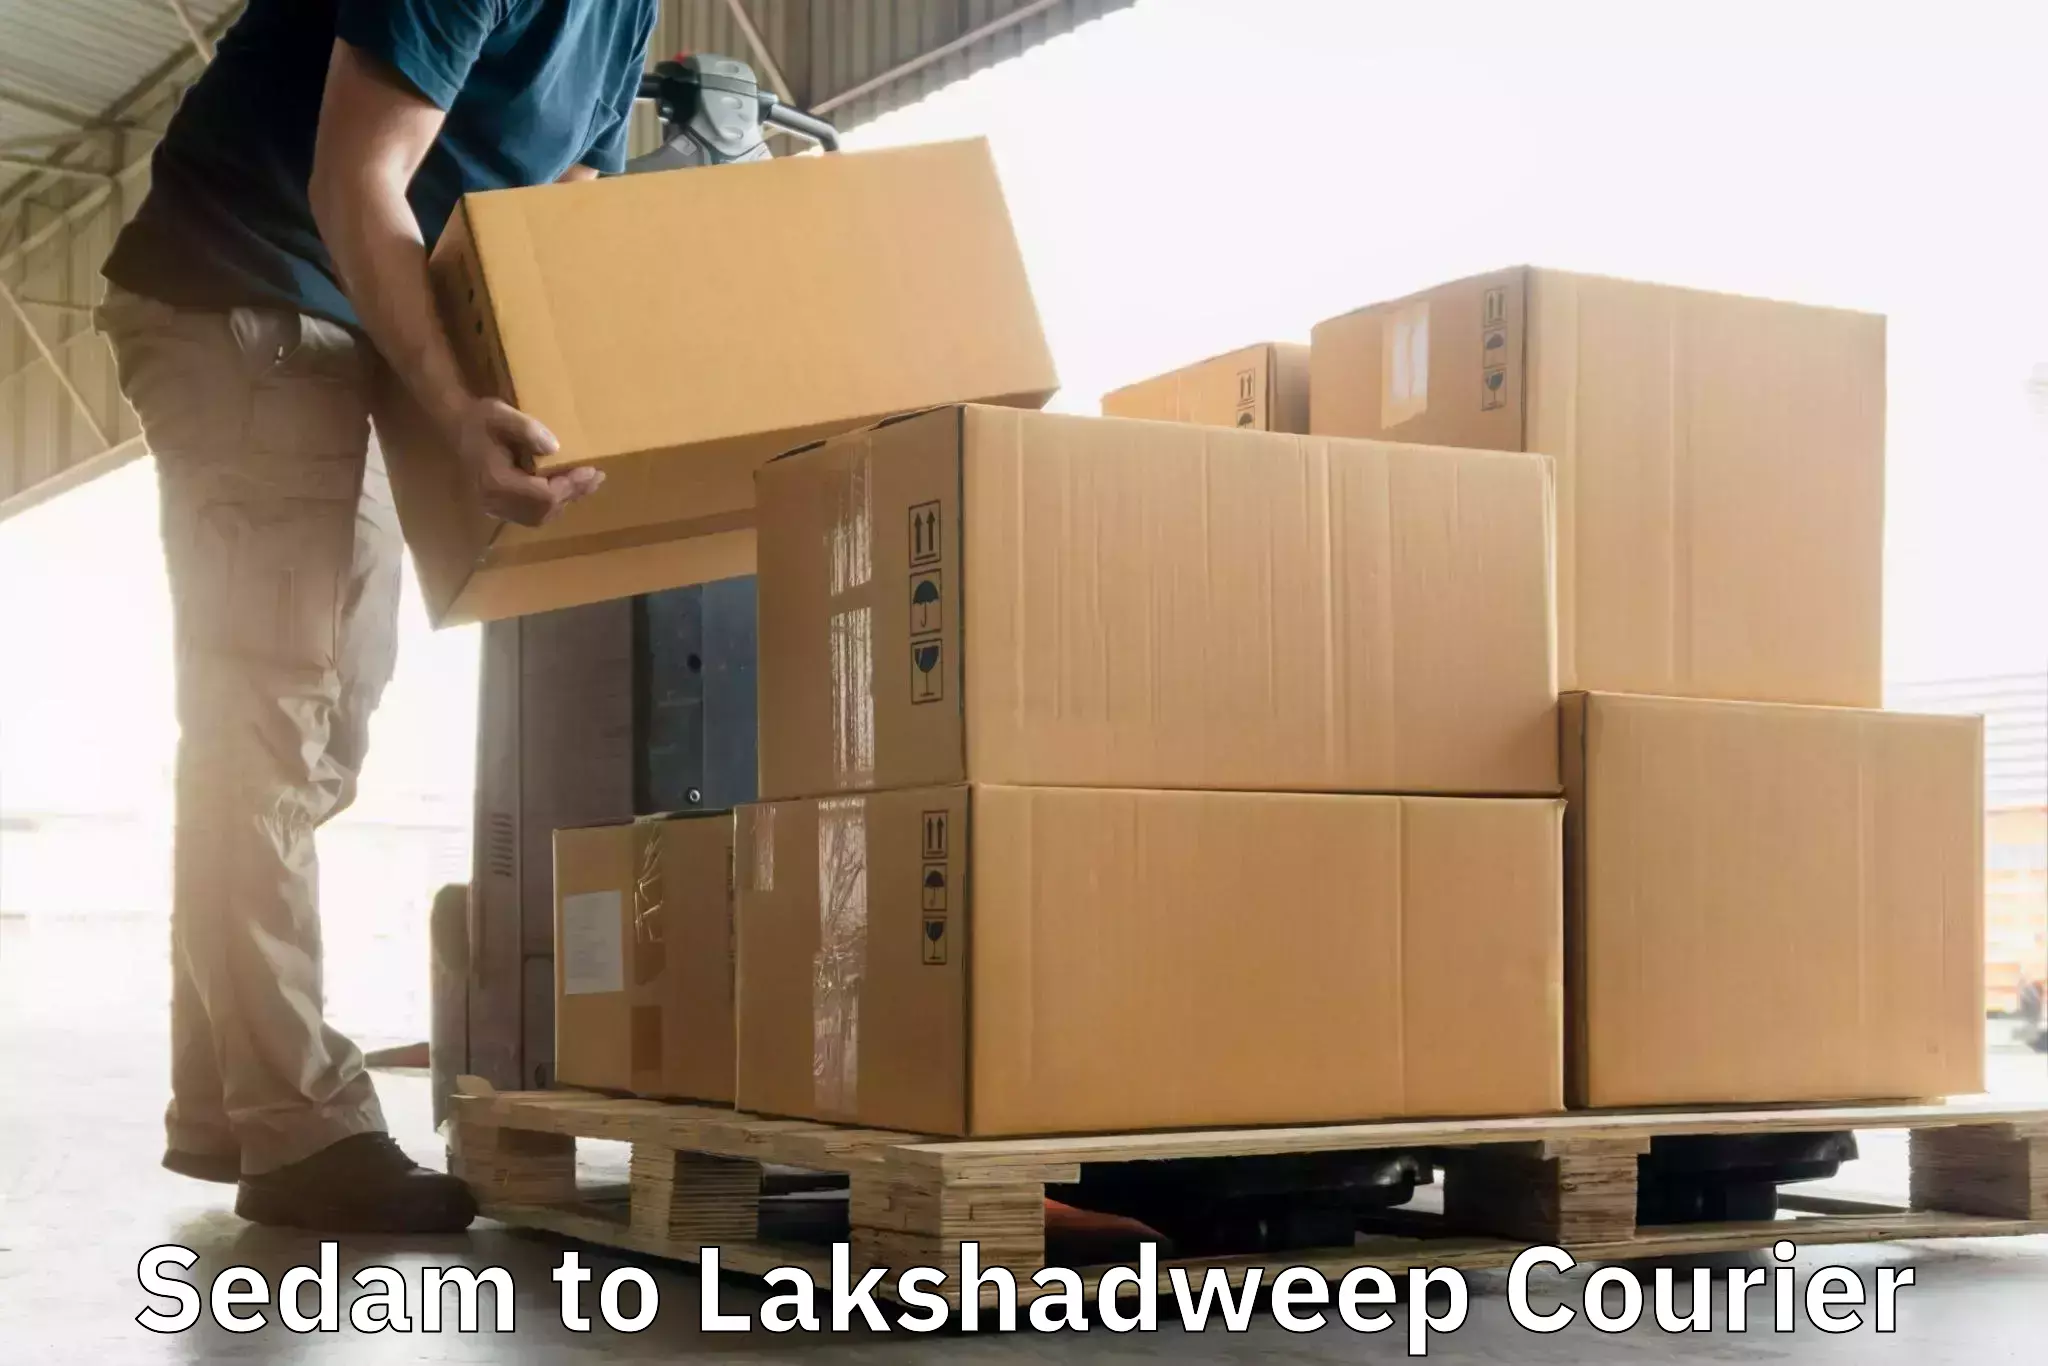 Pharmaceutical courier in Sedam to Lakshadweep